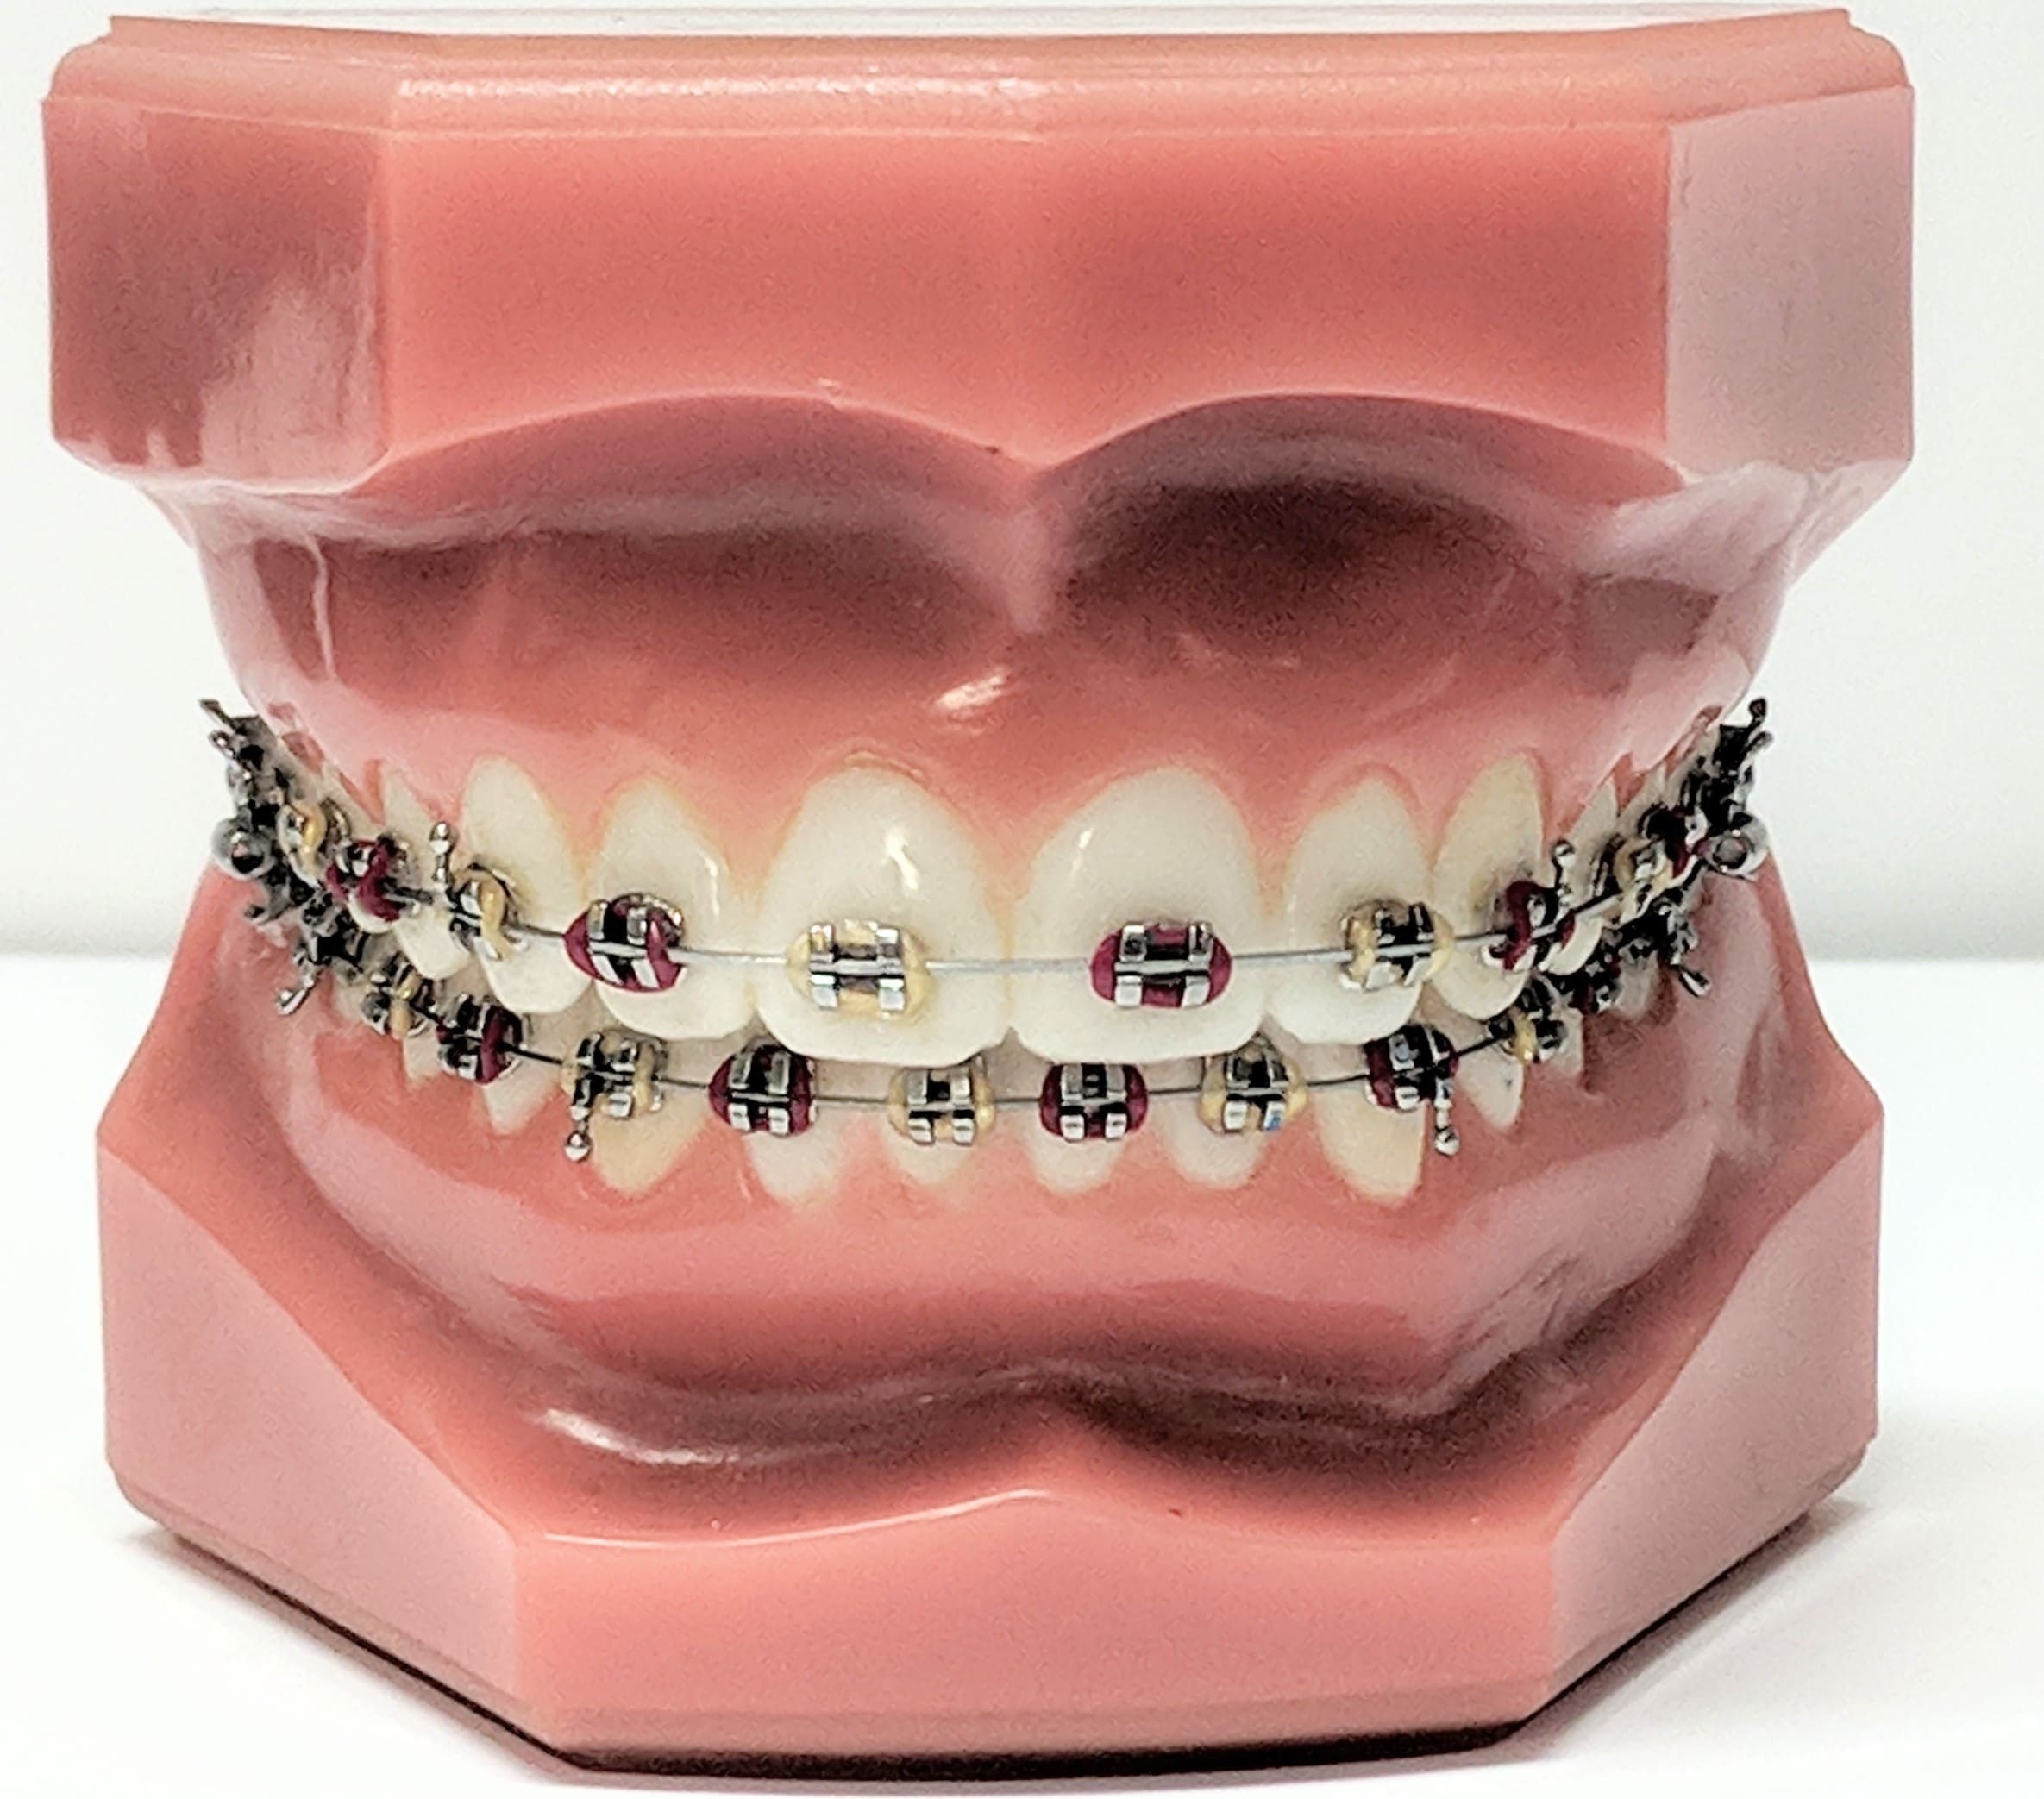 Metal, Clear and Ceramic Braces. What's the Difference?